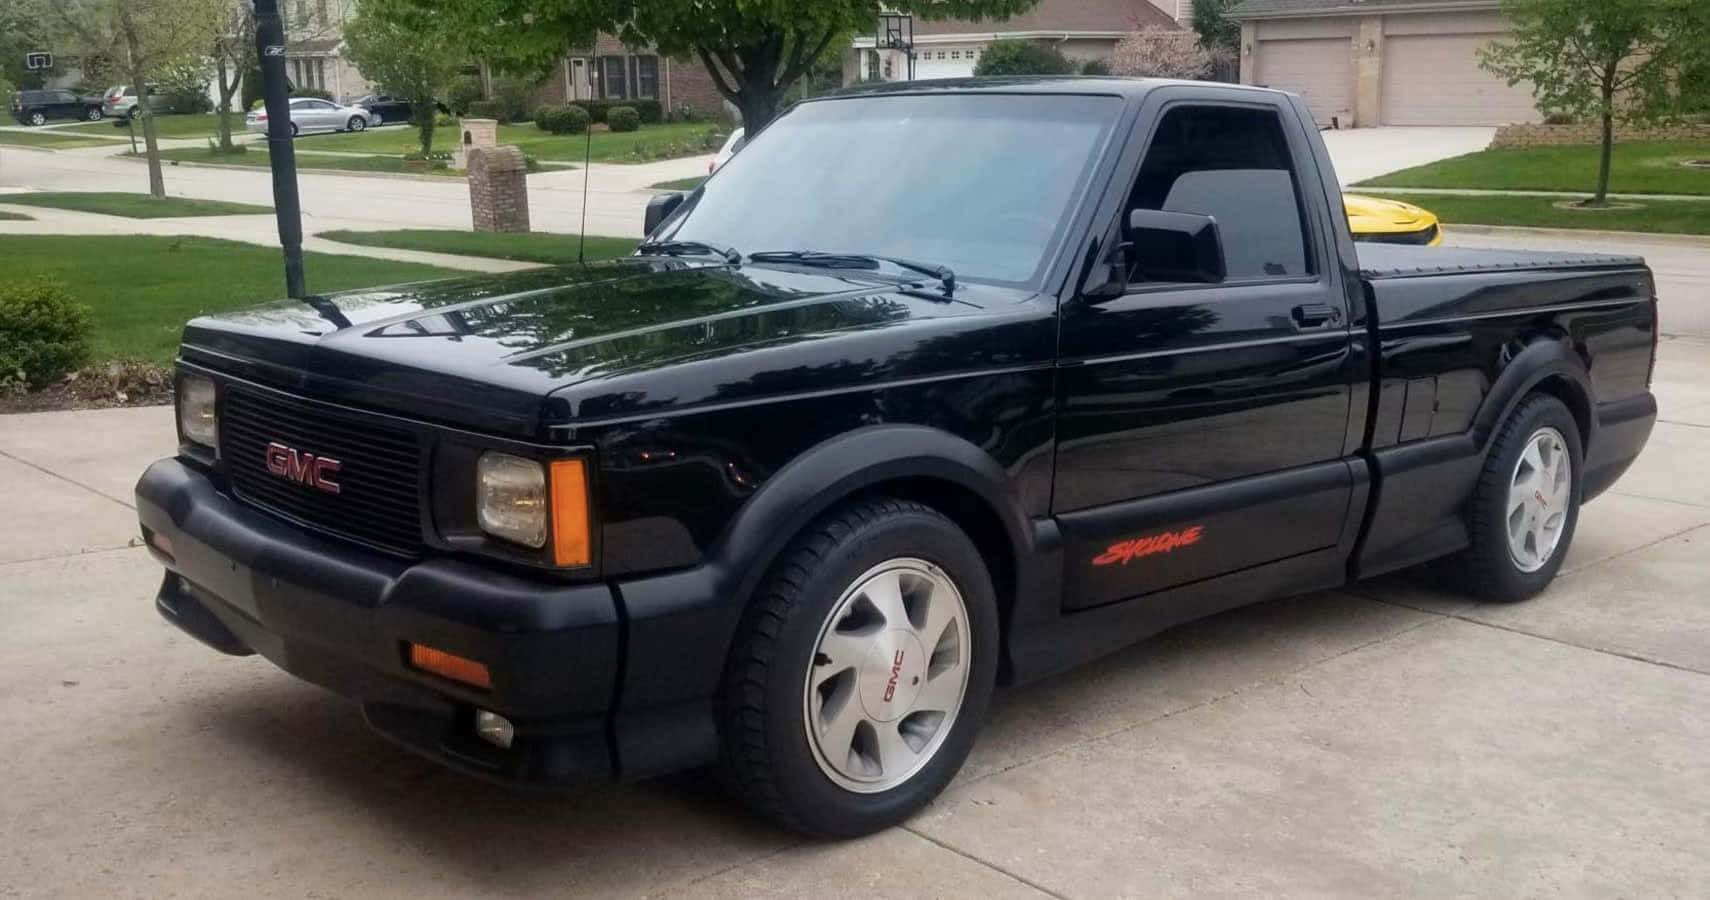 Gmc Syclone In Action Wallpaper